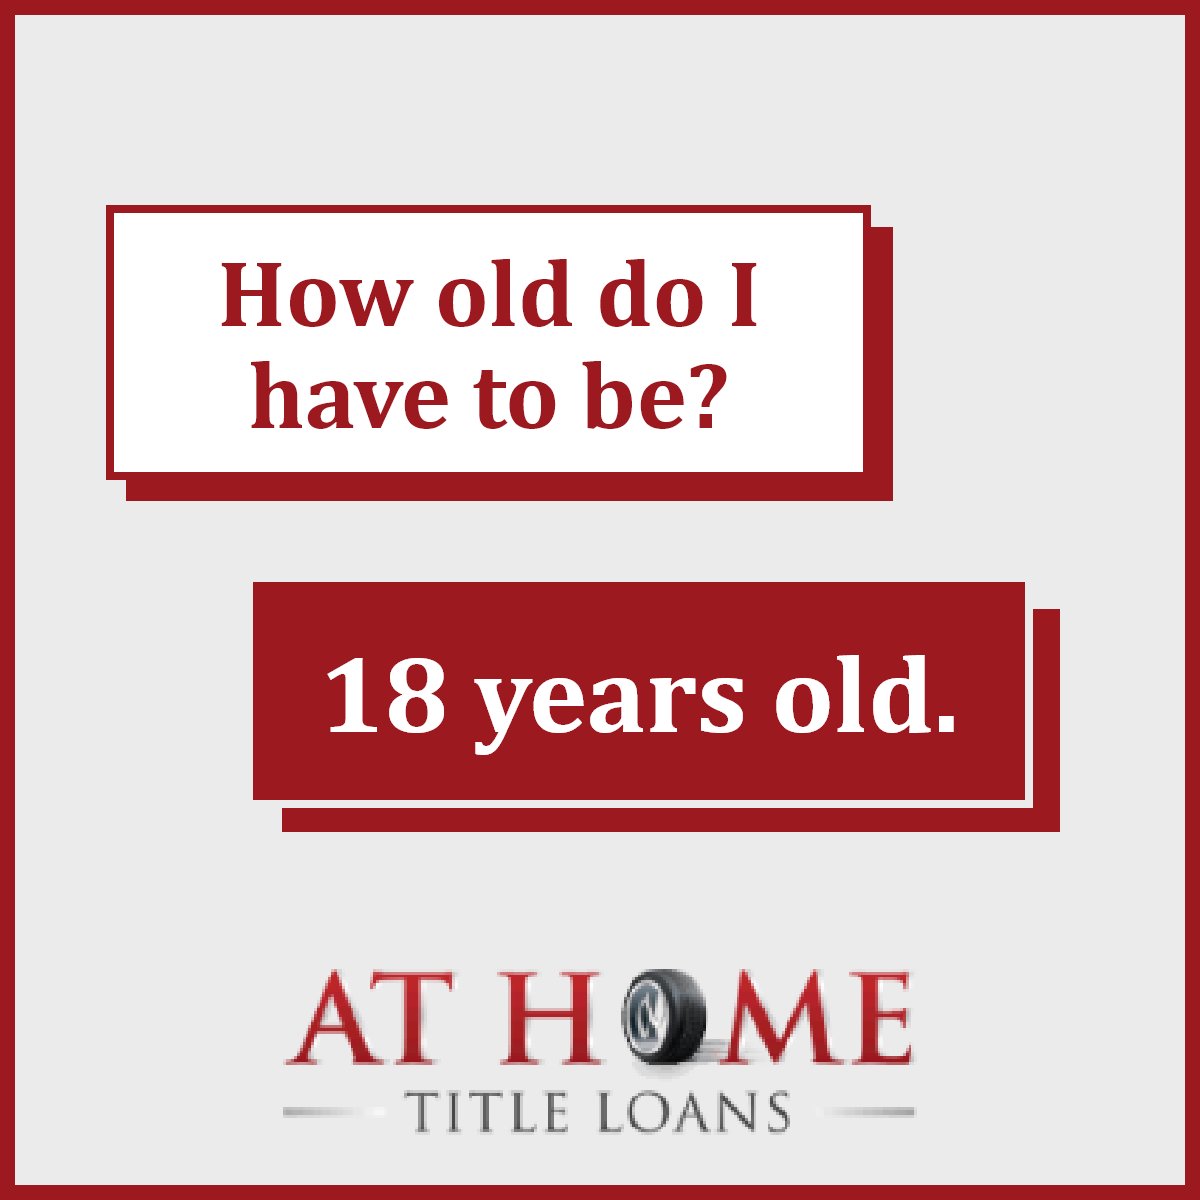 That's right! You just need to be at least 18 years old to qualify for a title loan.🚗💵👍 You could get emergency cash immediately today or the next business day! Visit our website to get started: athometitleloans.com  

#AtHomeTitleLoans #onlinetitleloans #onlinetitlepawn